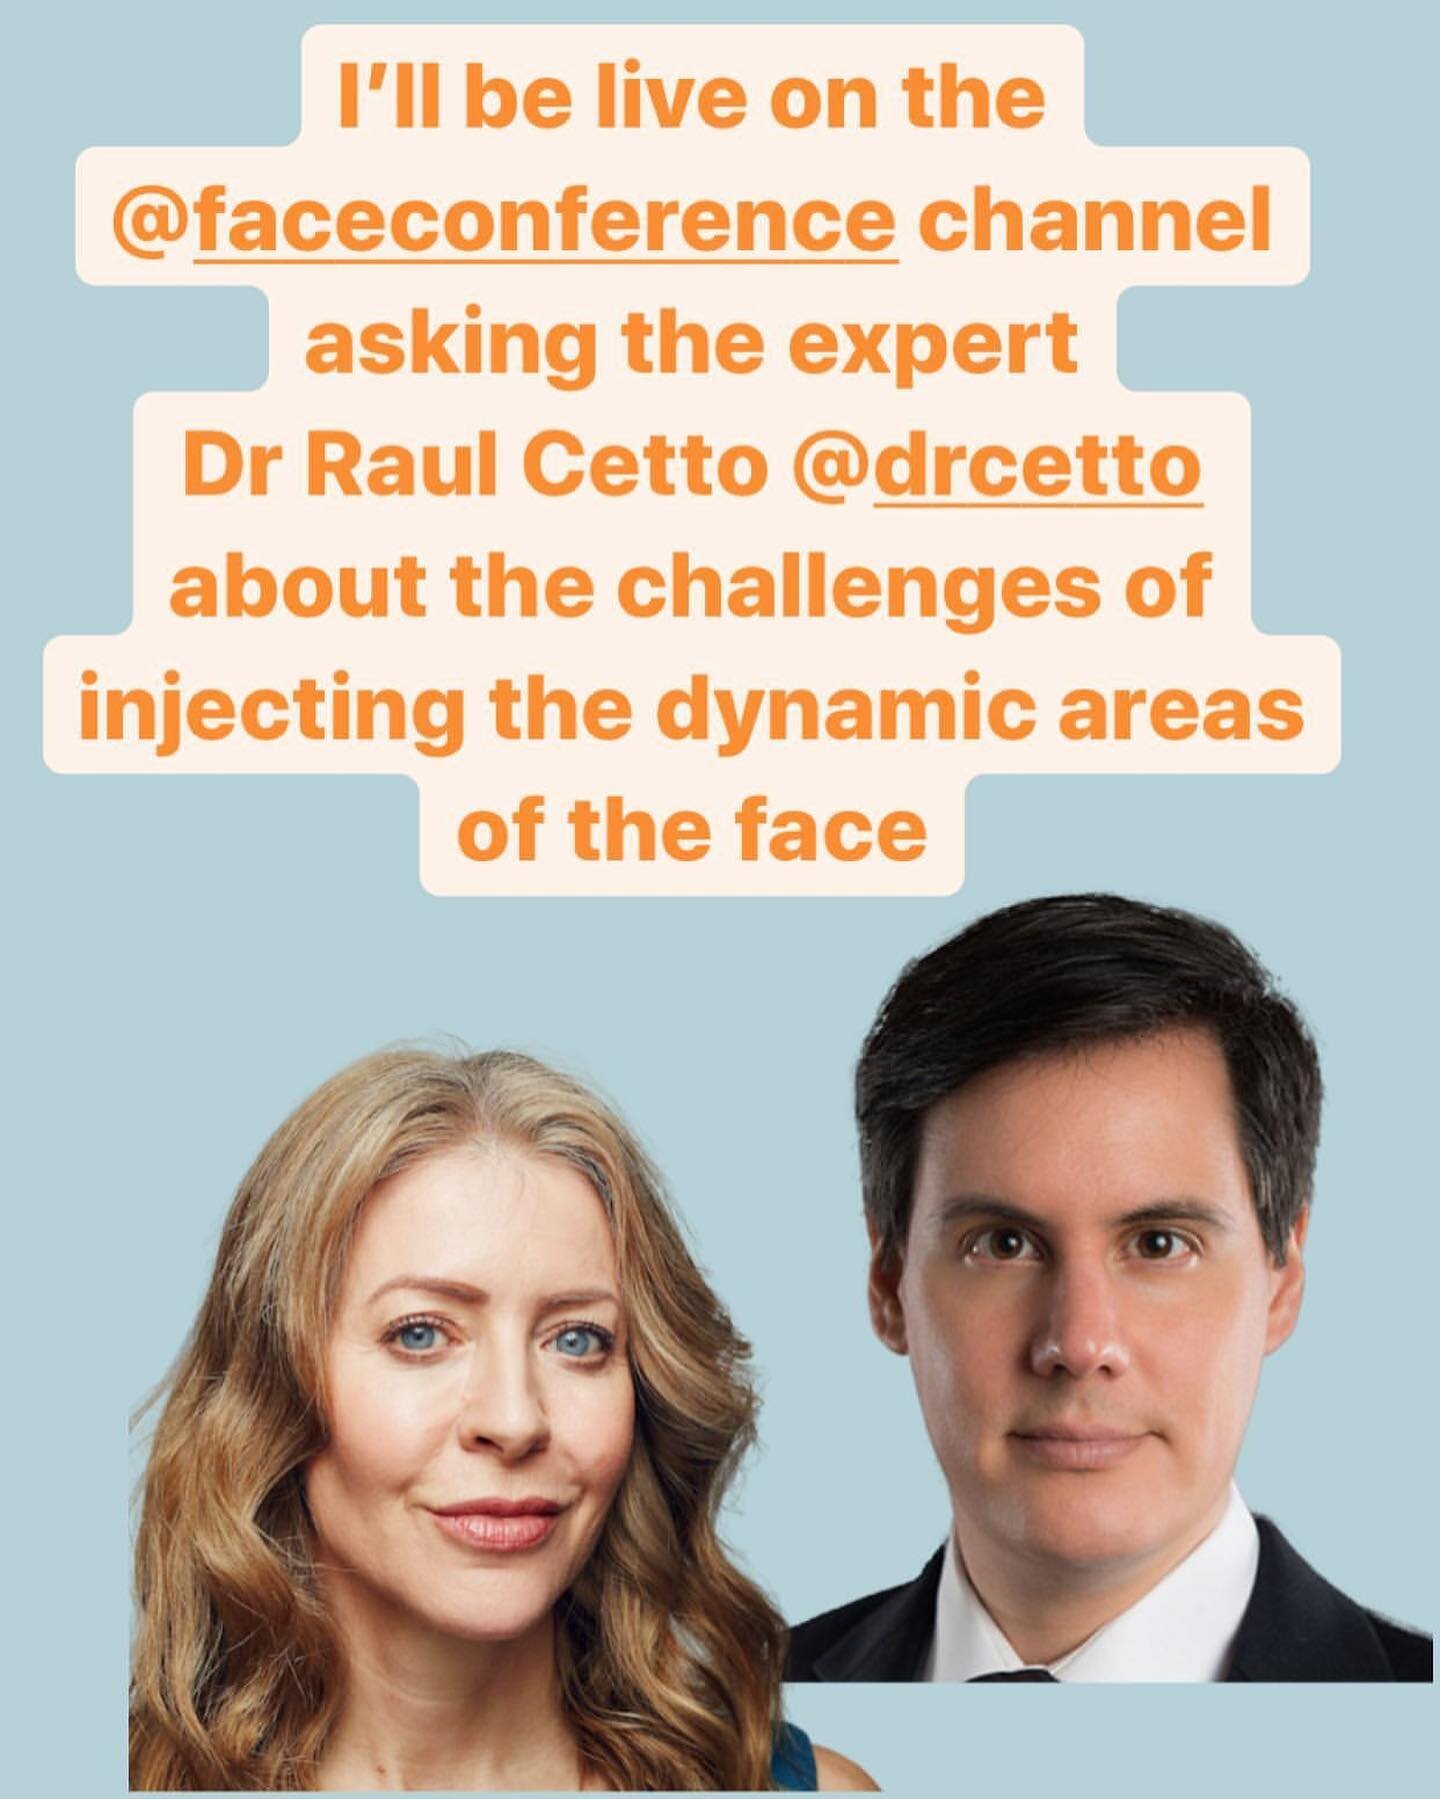 Please join me and world renowned journalist @alicehartdavis on the @faceconference instagram tomorrow at 2pm BST where we will be discussing some of the challenges in treating the dynamic areas of the face. #faceconference2020 #dynamicfiller #natura